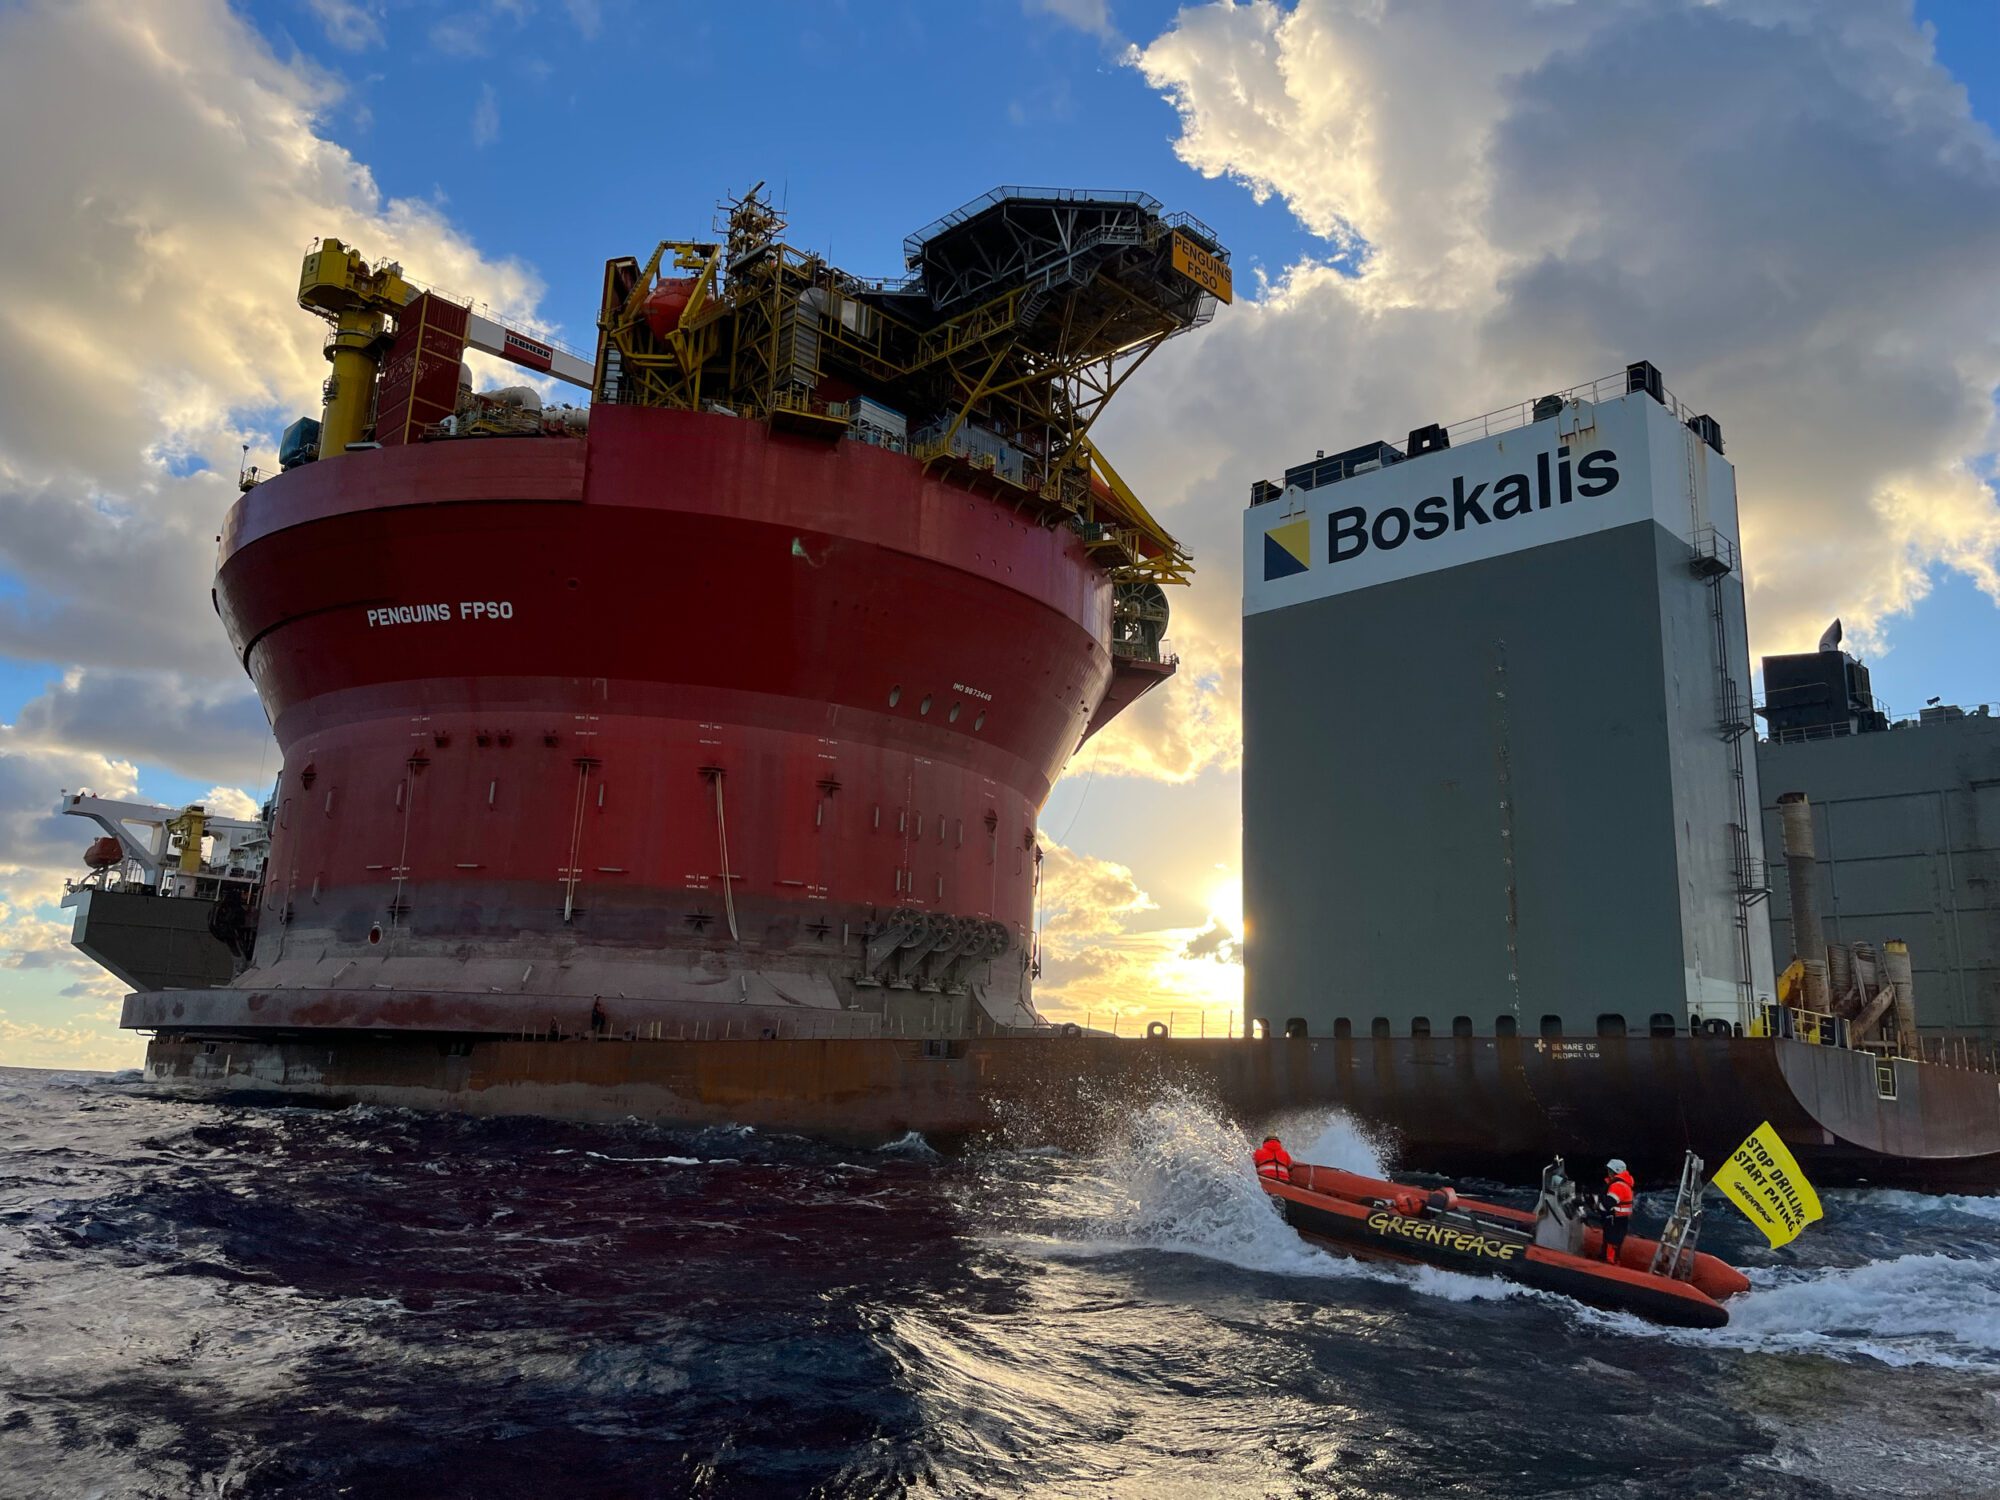 A small inflatable boat with the Greenpeace logo on the side approaches a cargo ship carrying a huge cylindrical oil platform.